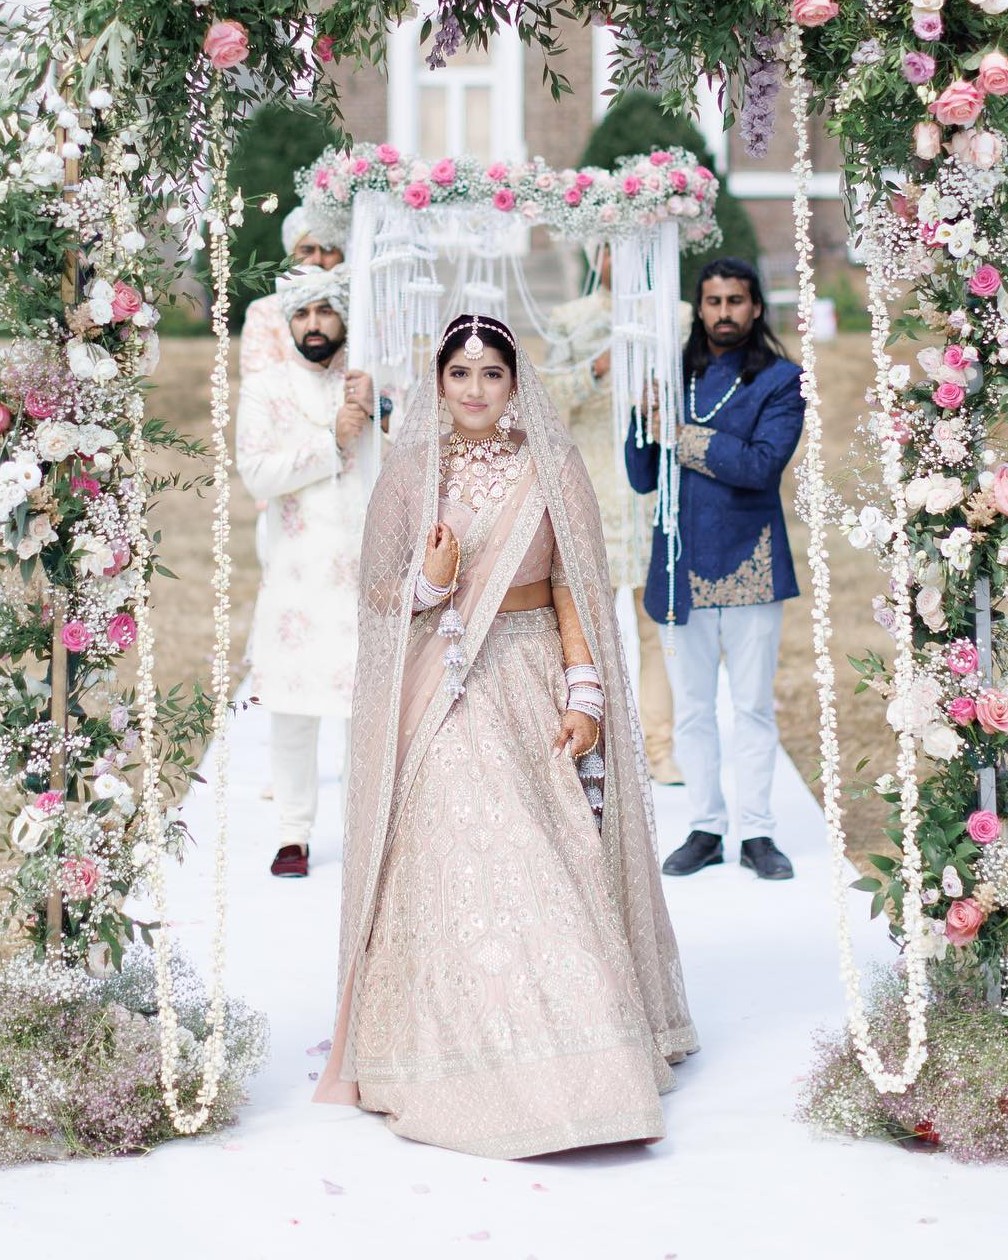 Sabyasachi Bride Wore A Serene Blush Pink Lehenga Paired With ‘Jhoomar’ Jewellery At Her Wedding